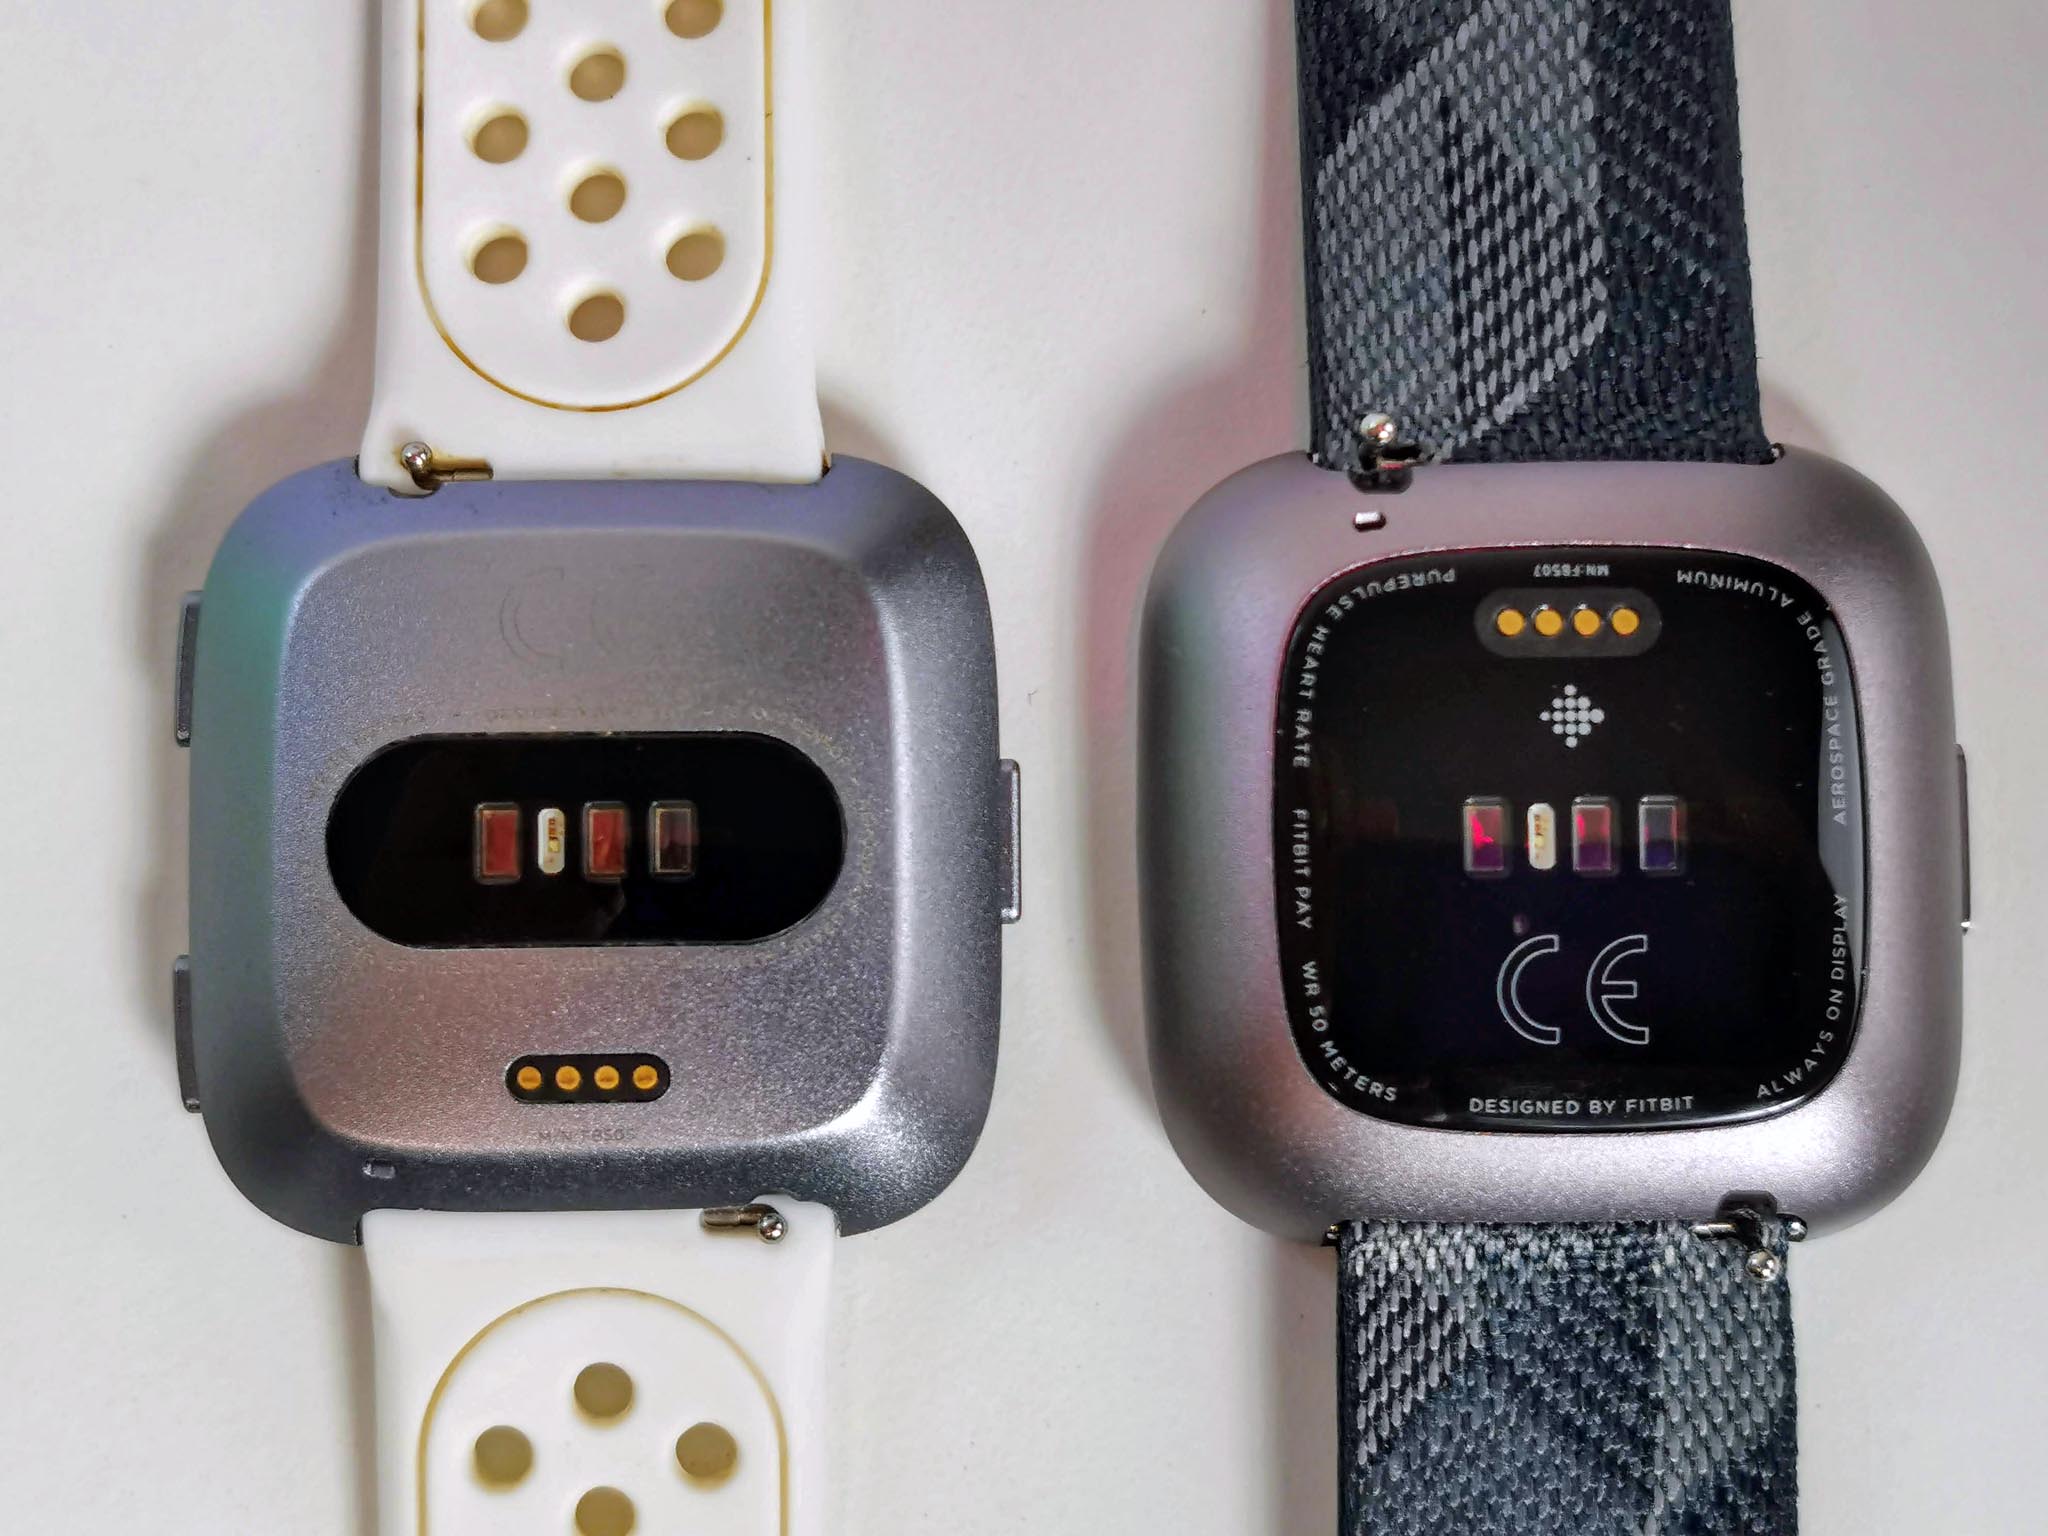 differences between fitbit versa and versa 2